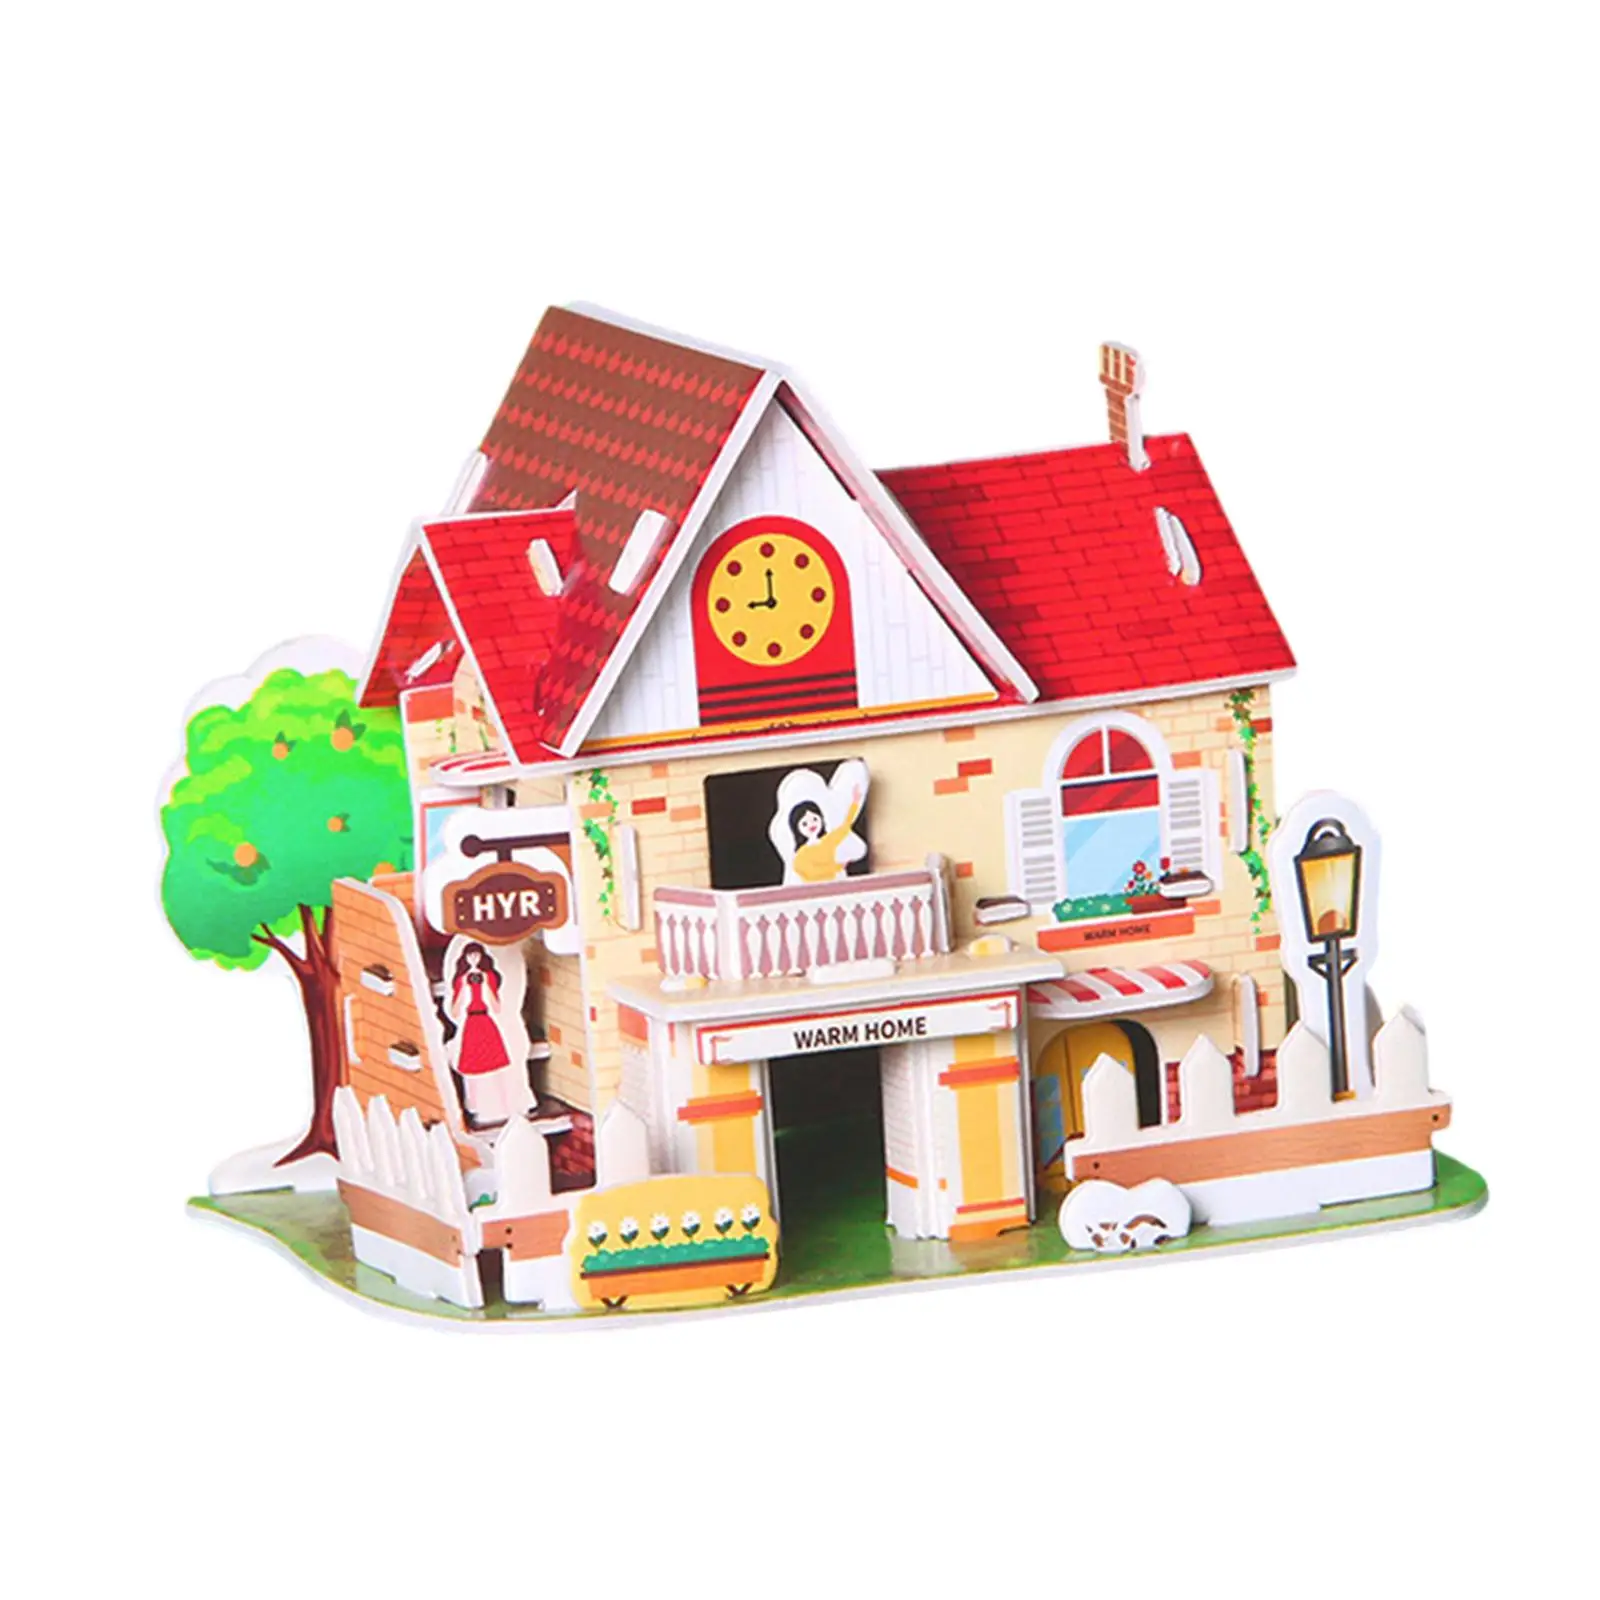 DIY 3D Puzzle Toys Hut Buildings for Adults Kids Birthday Gift Ornament